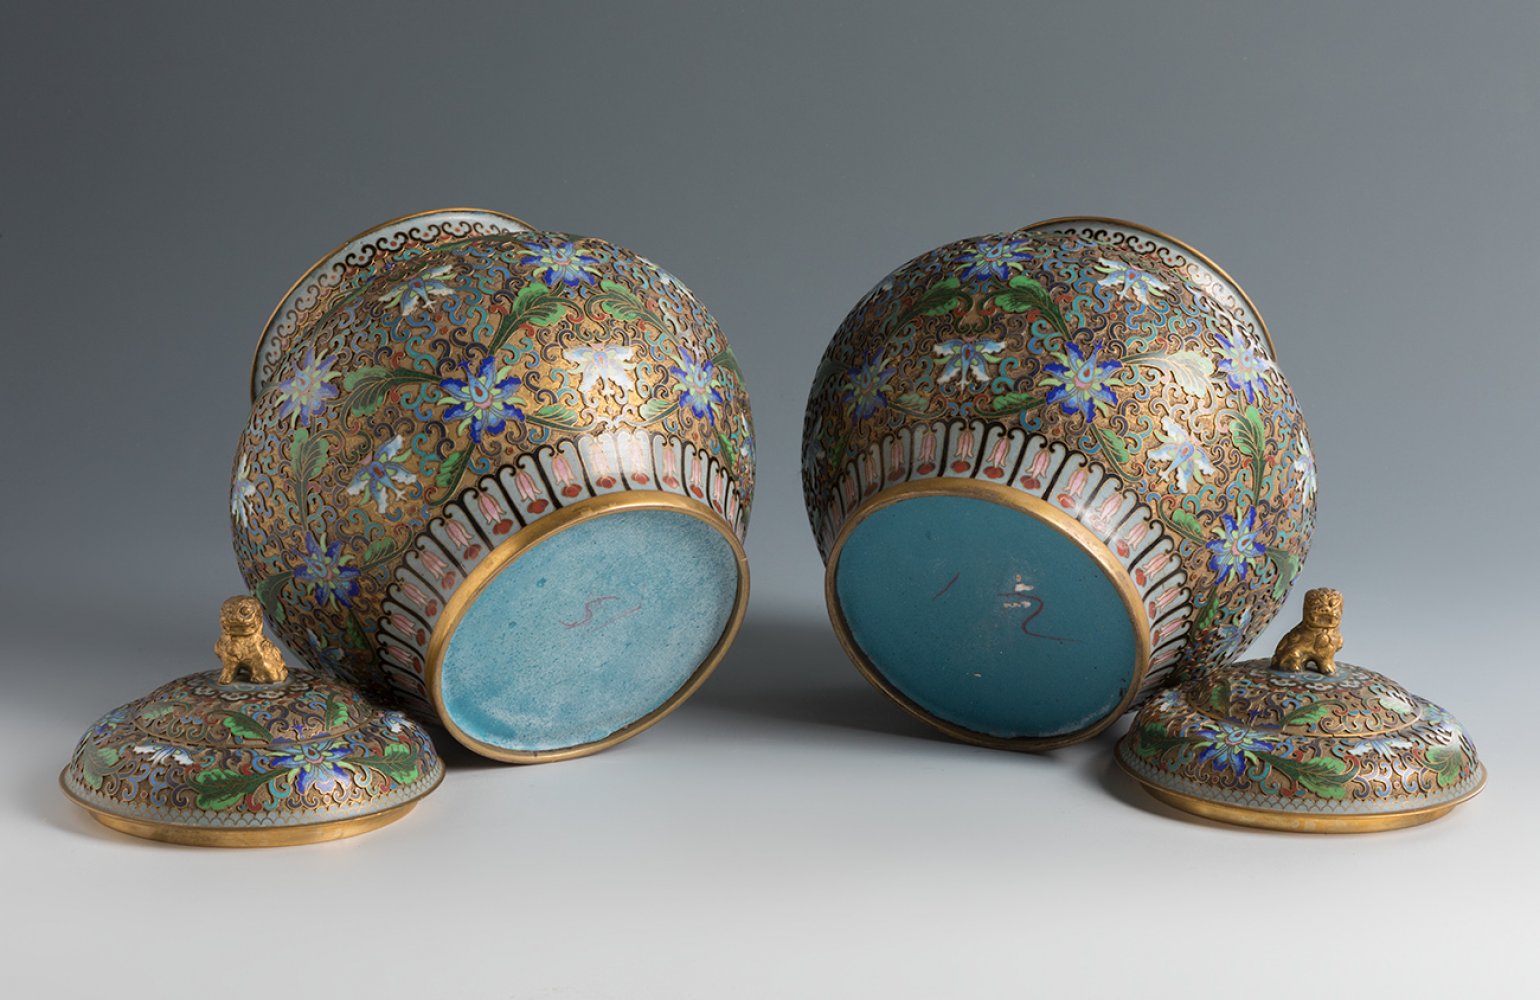 Pair of ginger storage jars. China, 1920-1940.Bronze and cloisonné enamel. Carved wooden bases. - Image 2 of 4